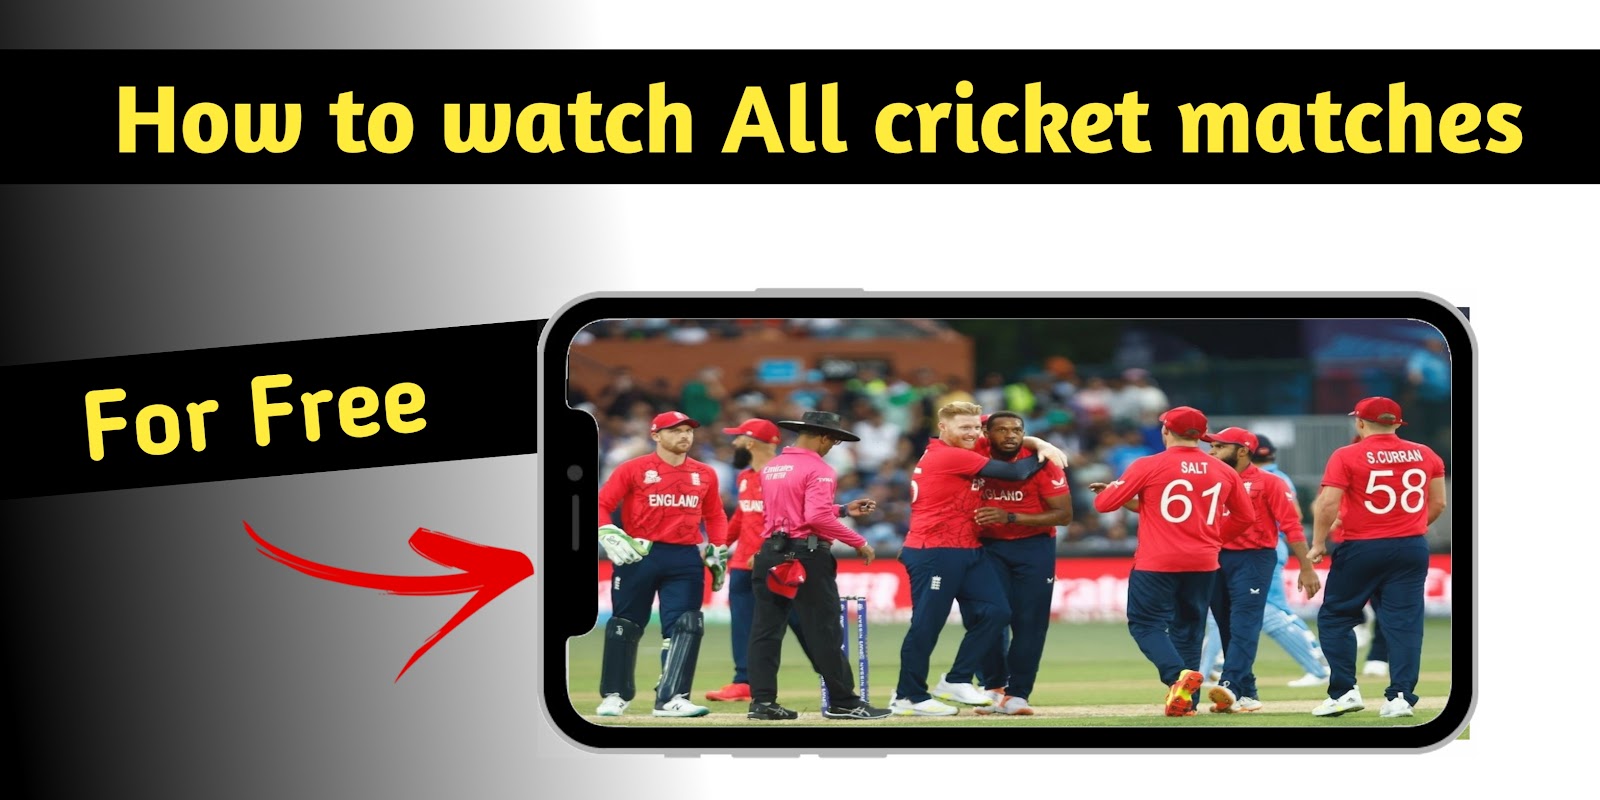 How to Watch ICC T20 World Cup for Free? Can we watch T20 matches for free?